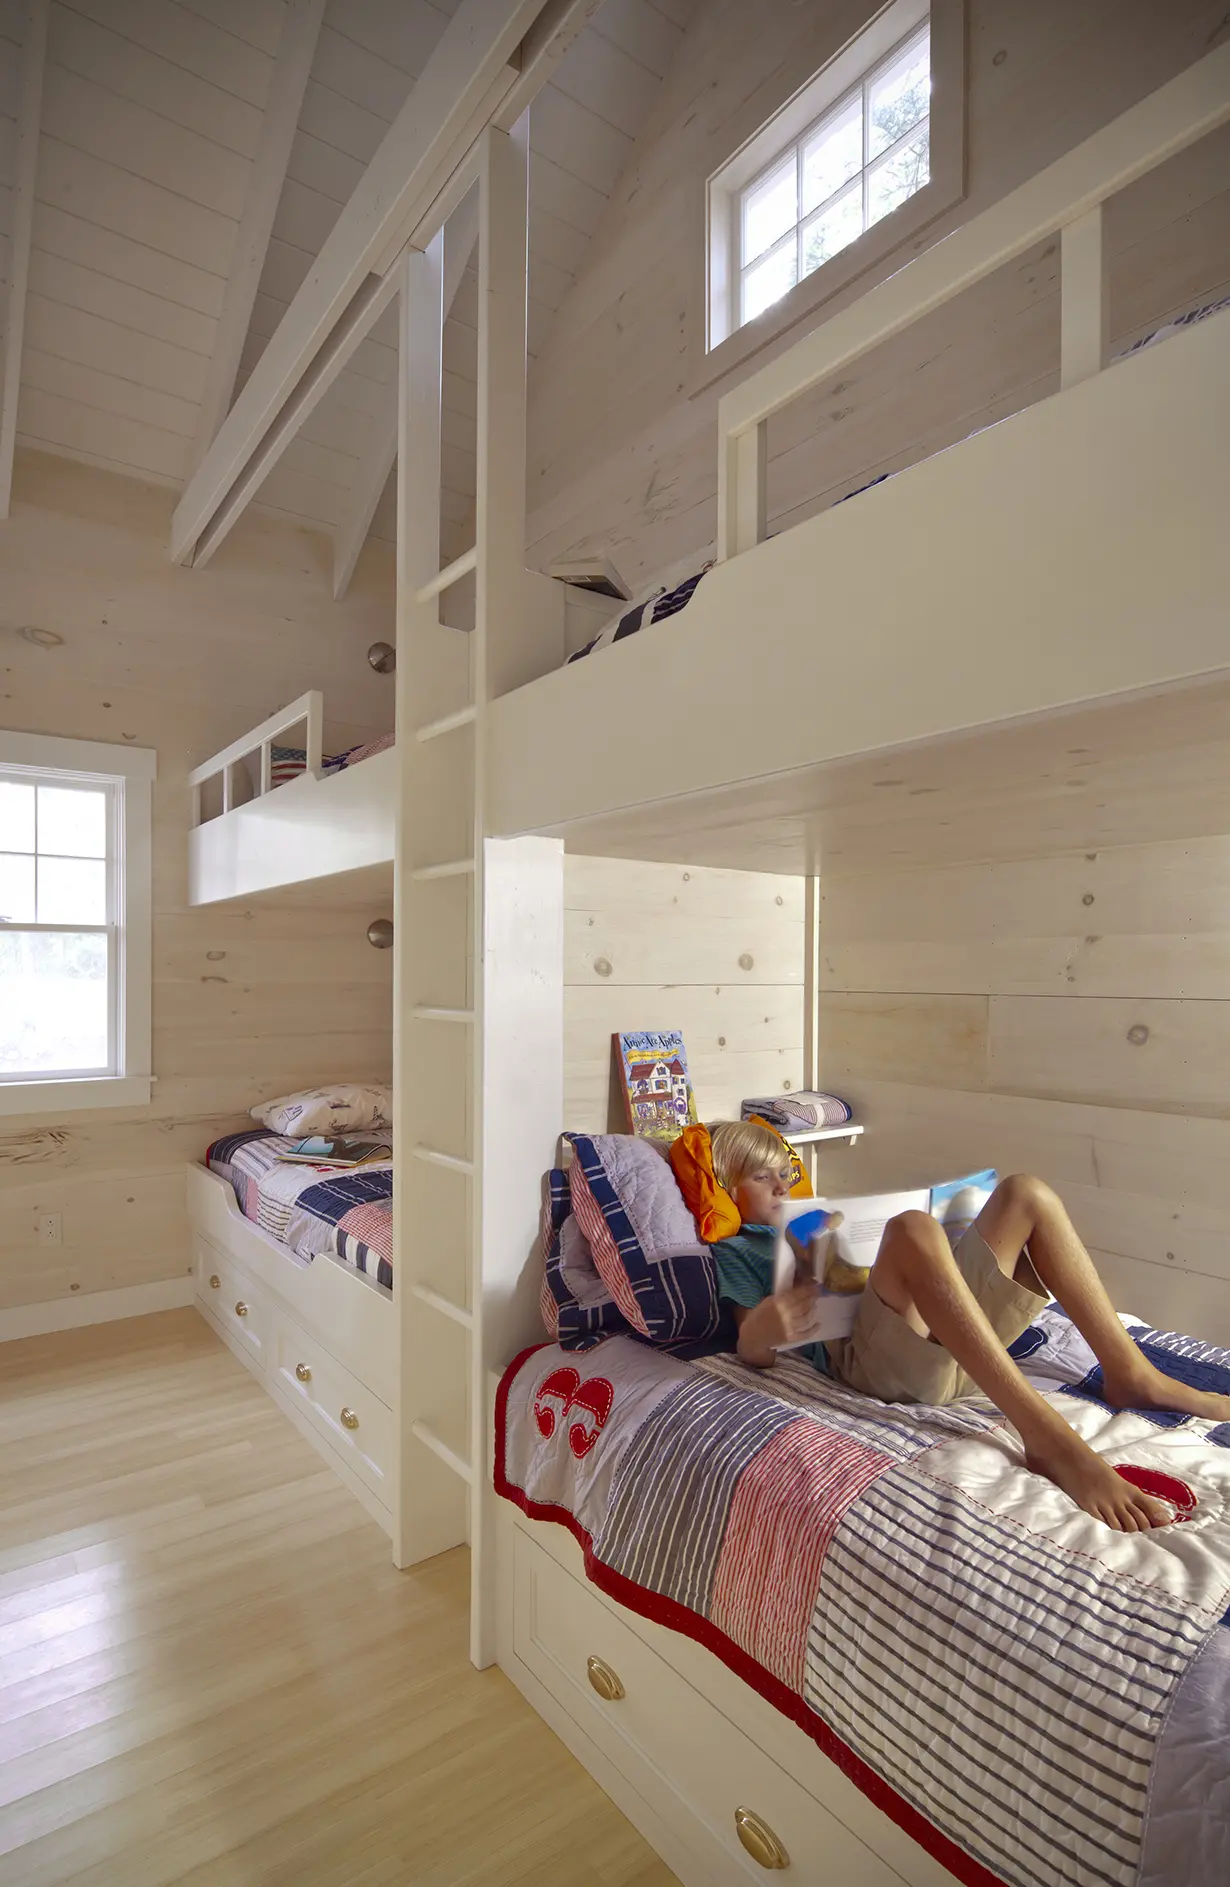 Bright and cozy bunk room with built-in bunkbeds and ladder.